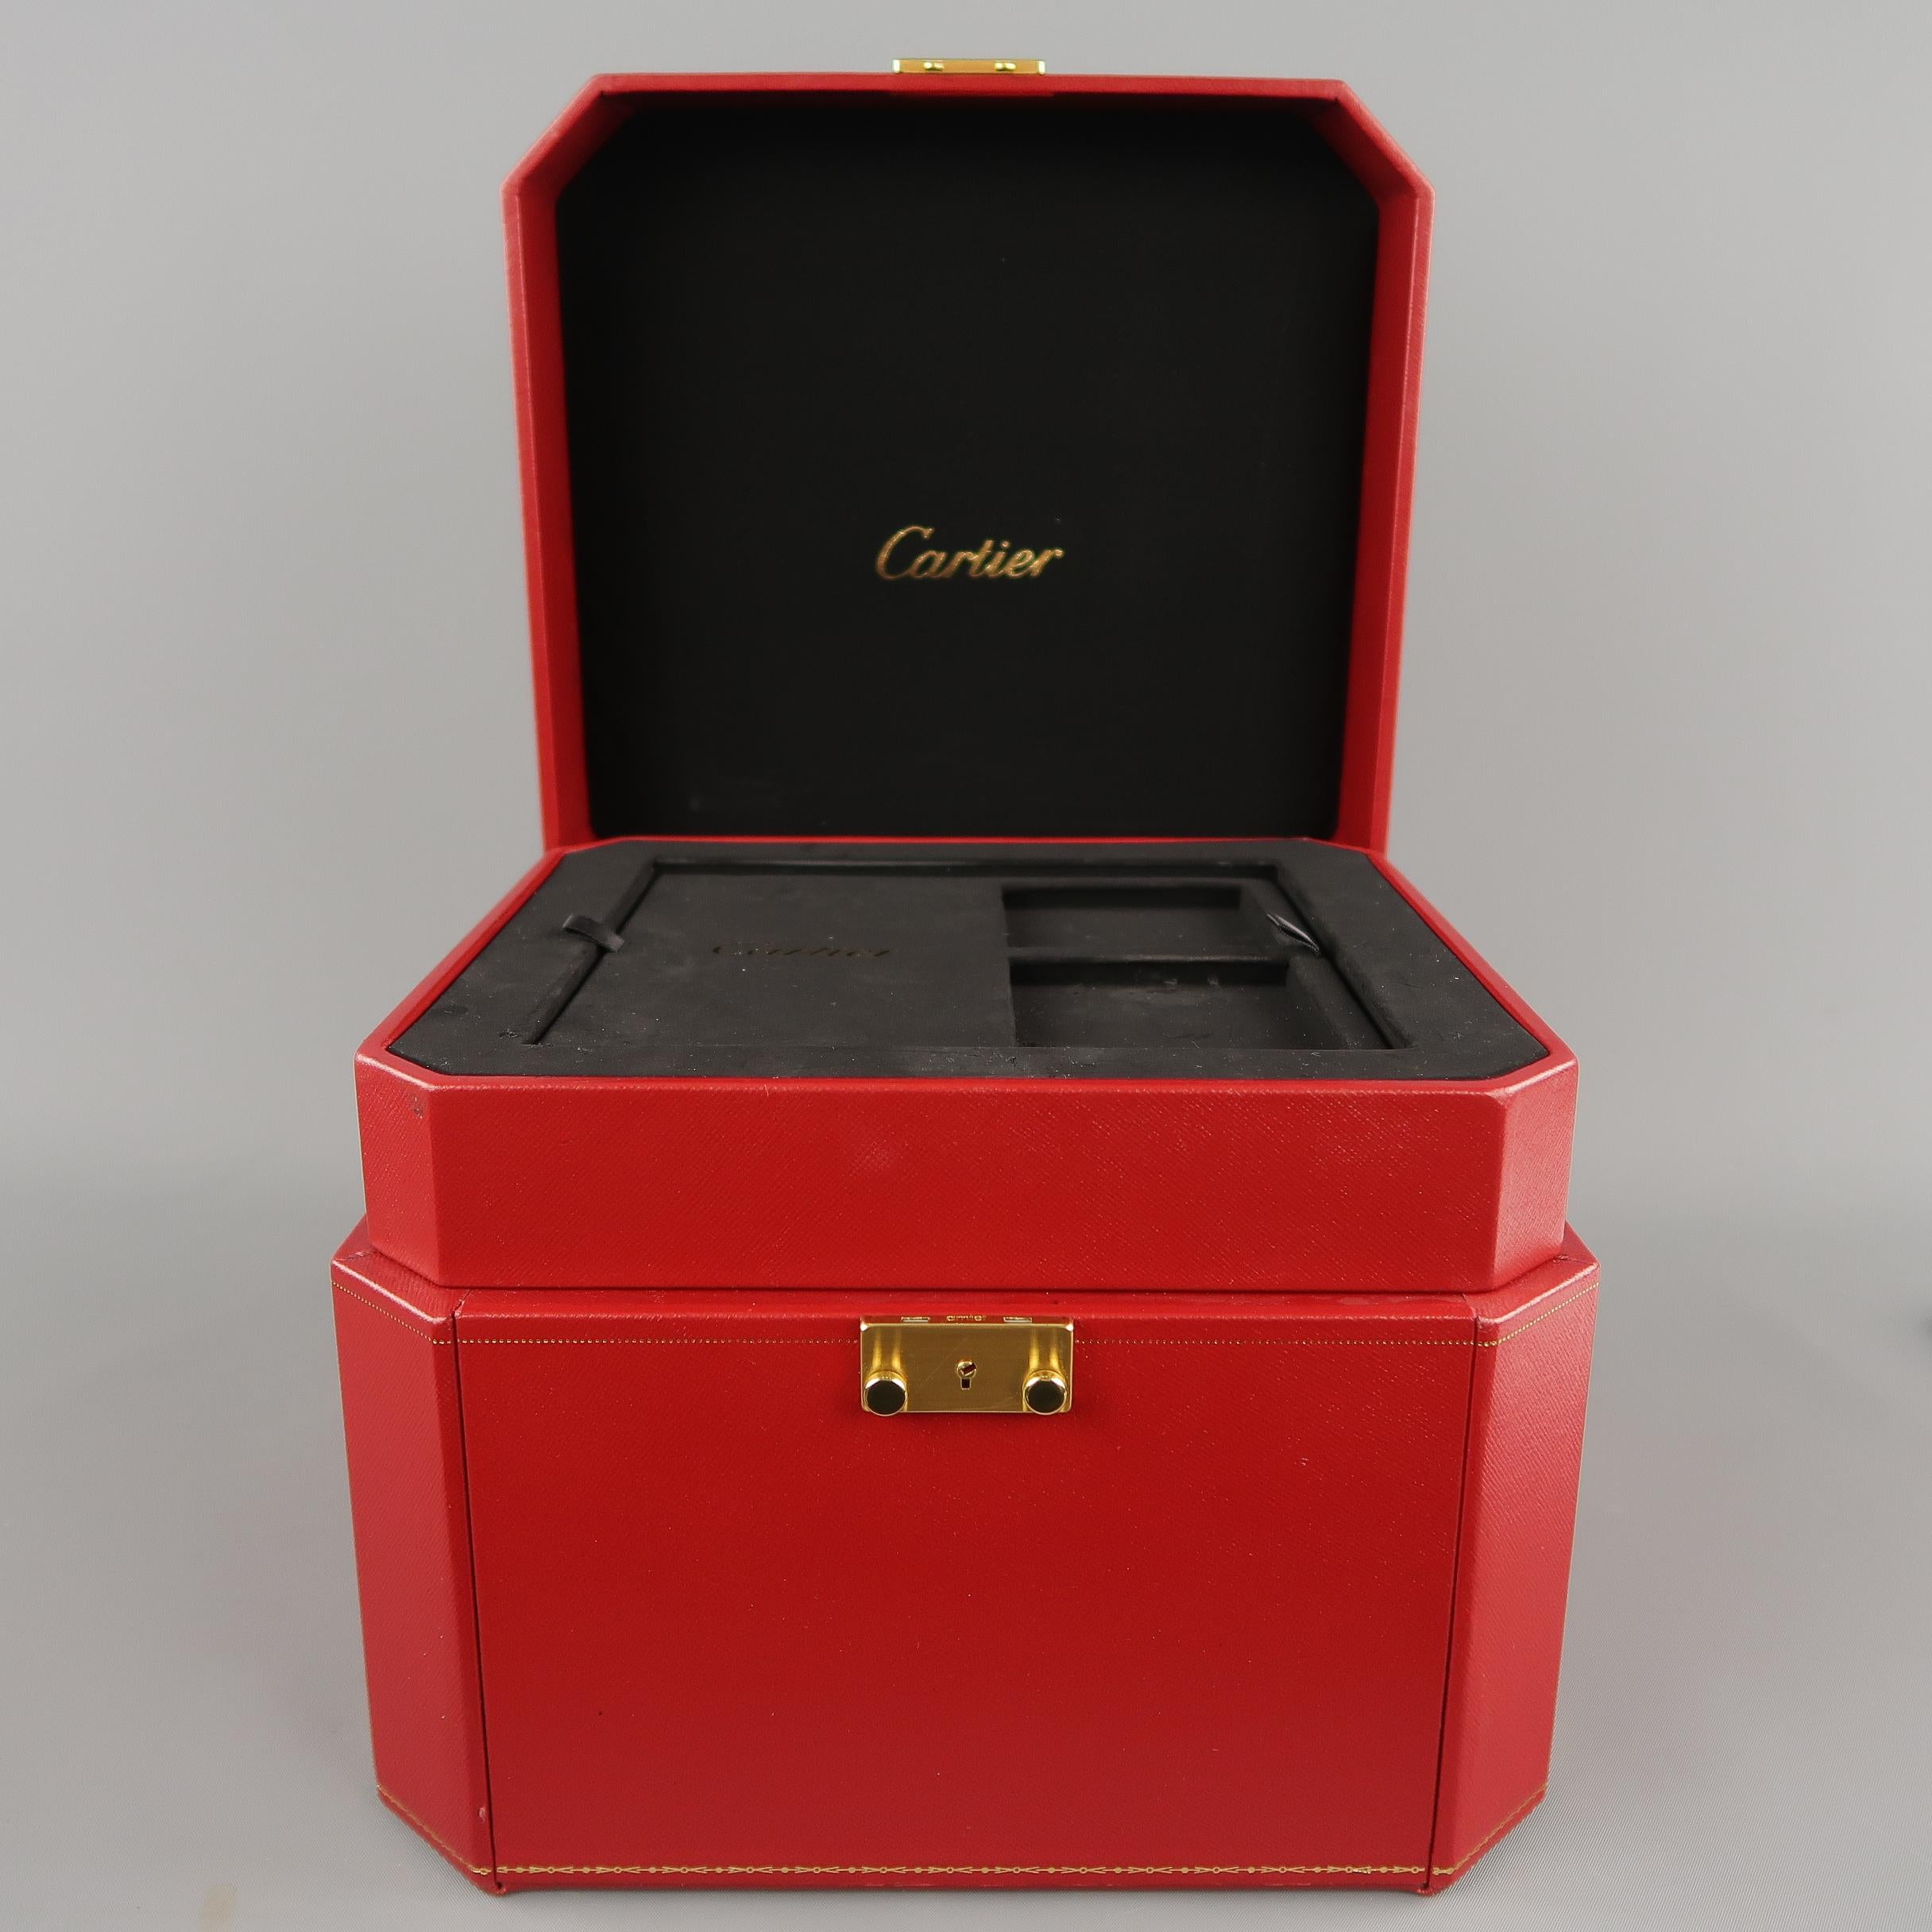 Vintage CARTIER jewelry box comes in signature red textured coated canvas in an octagonal cube shape, top handle, gold foil trim, gold tone metal lock closure with key, and black rubberized multi-compartment storage drawers. Wear consistant with